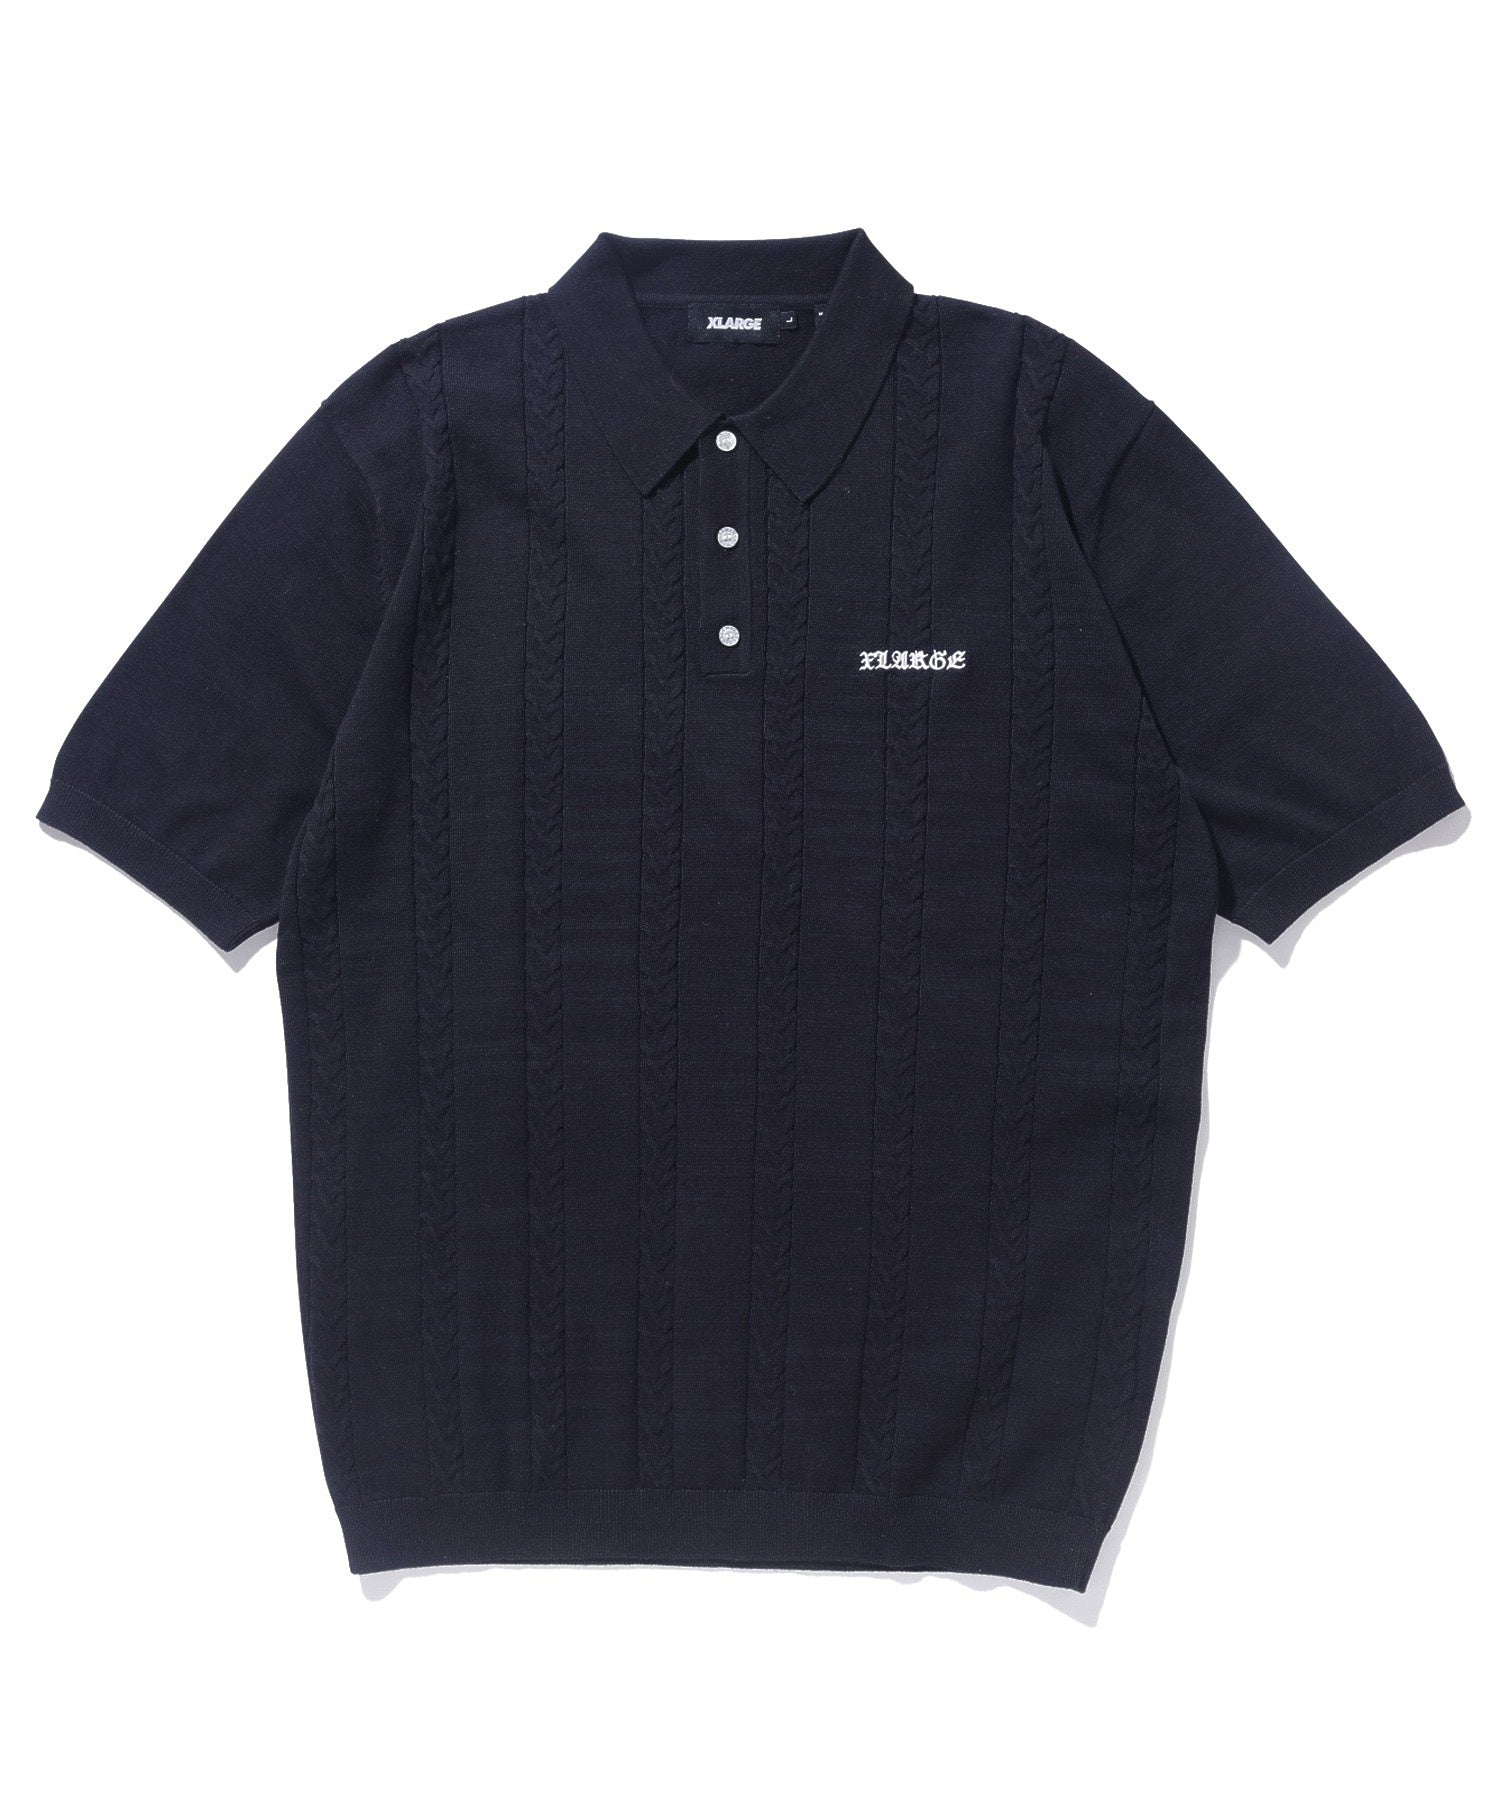 EMBROIDERED LOGO KNIT POLO SHIRT